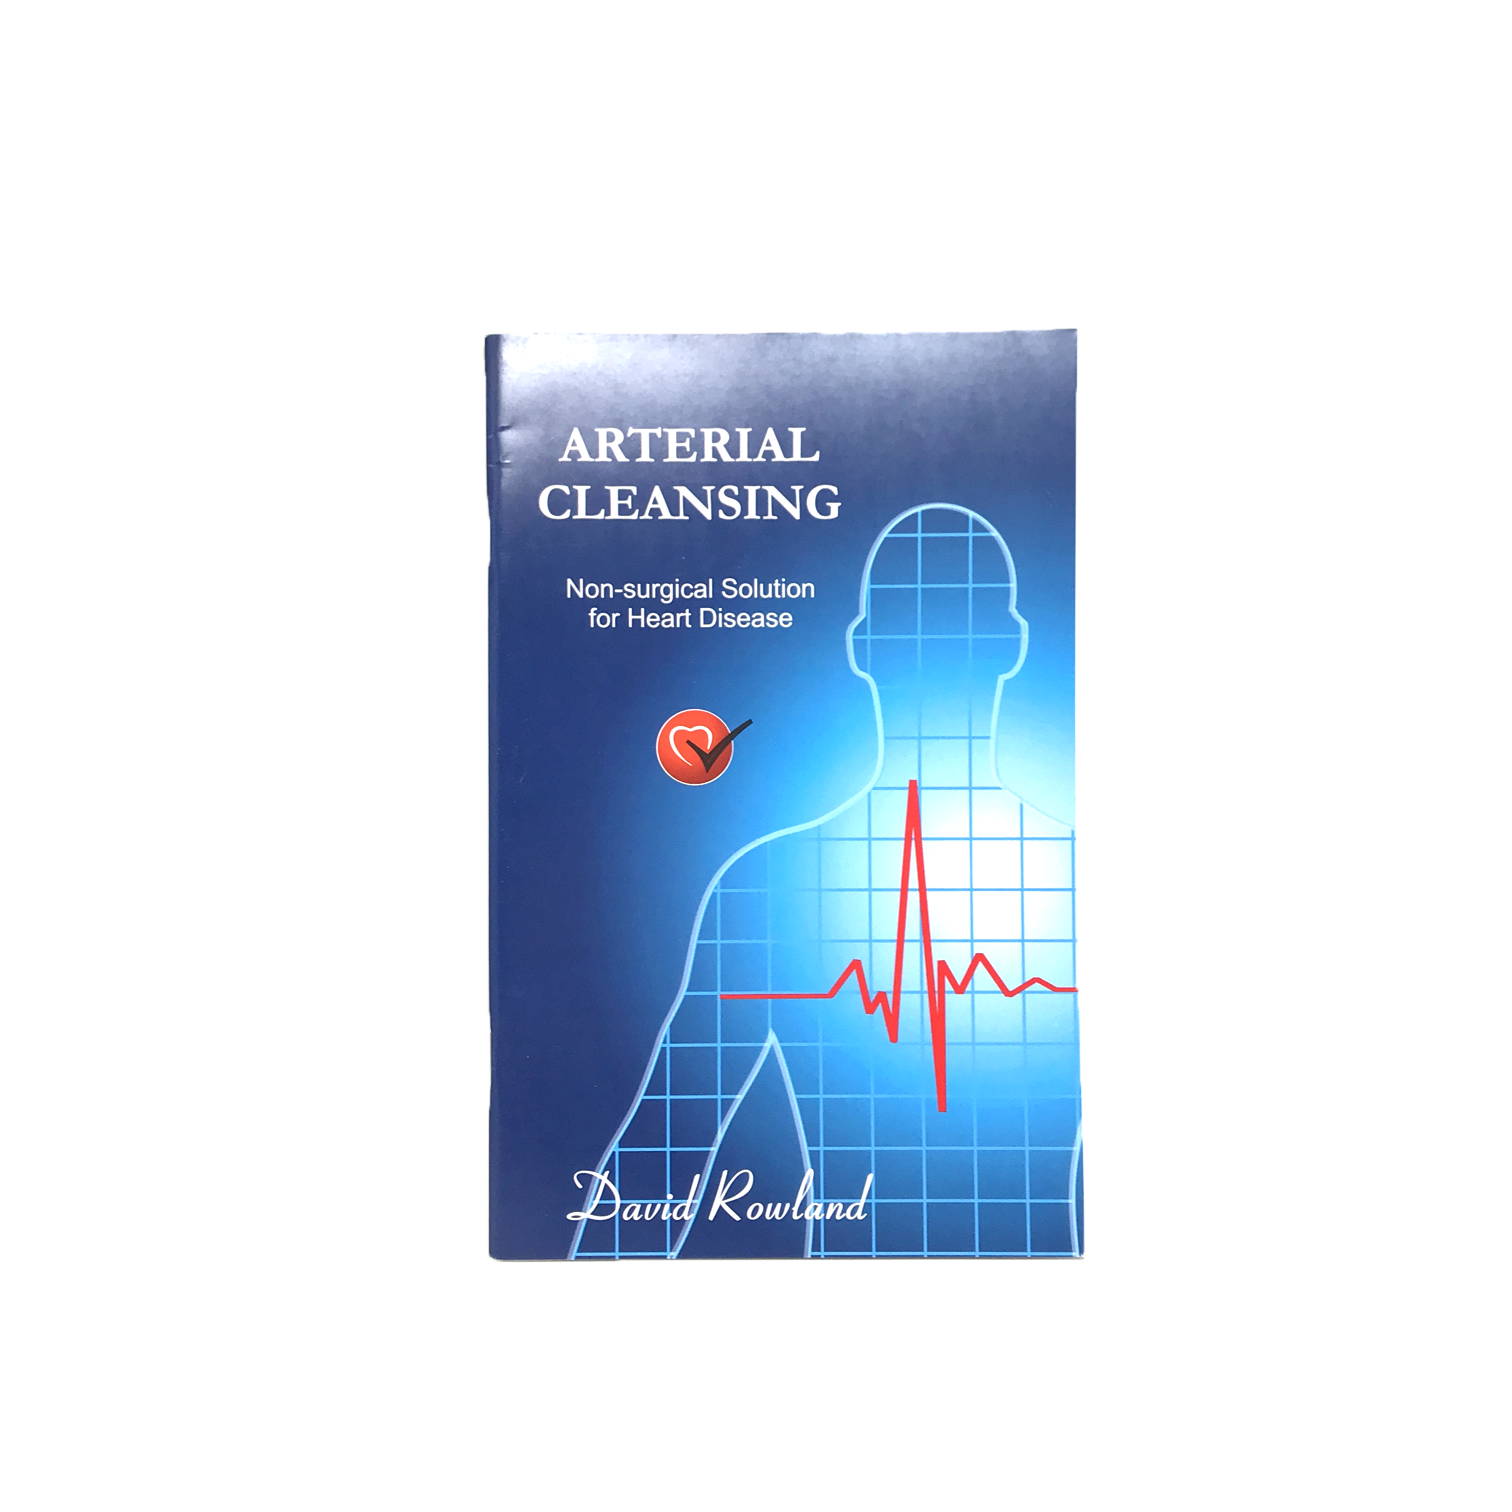 Arterial Cleansing By David W. Rowland